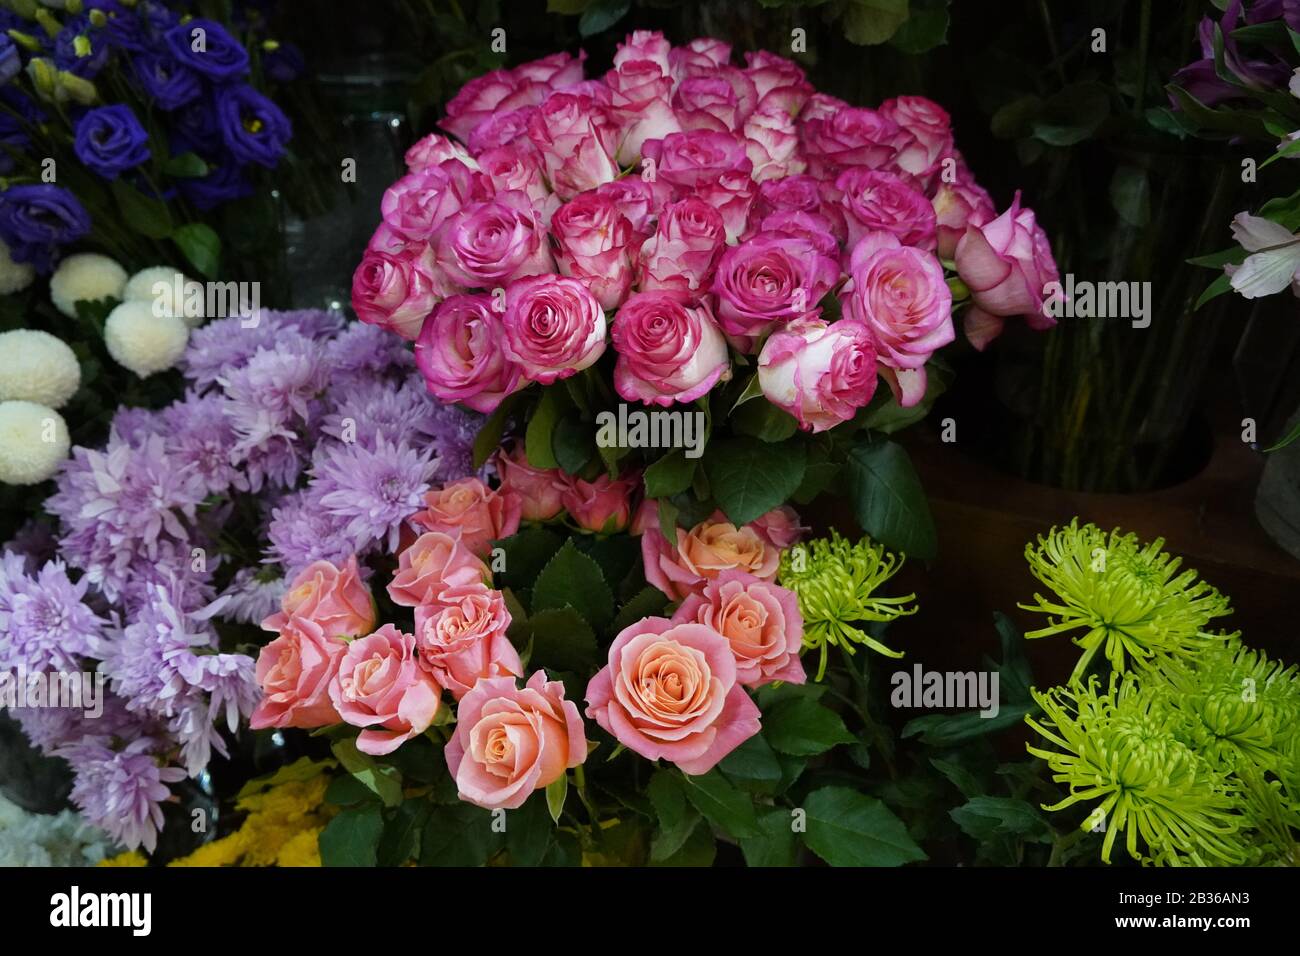 Bouquet of colorful roses and other different flowers at the entry to flower shop at farmers' market. Colorful peony, roses etc. Pots with flowers on Stock Photo